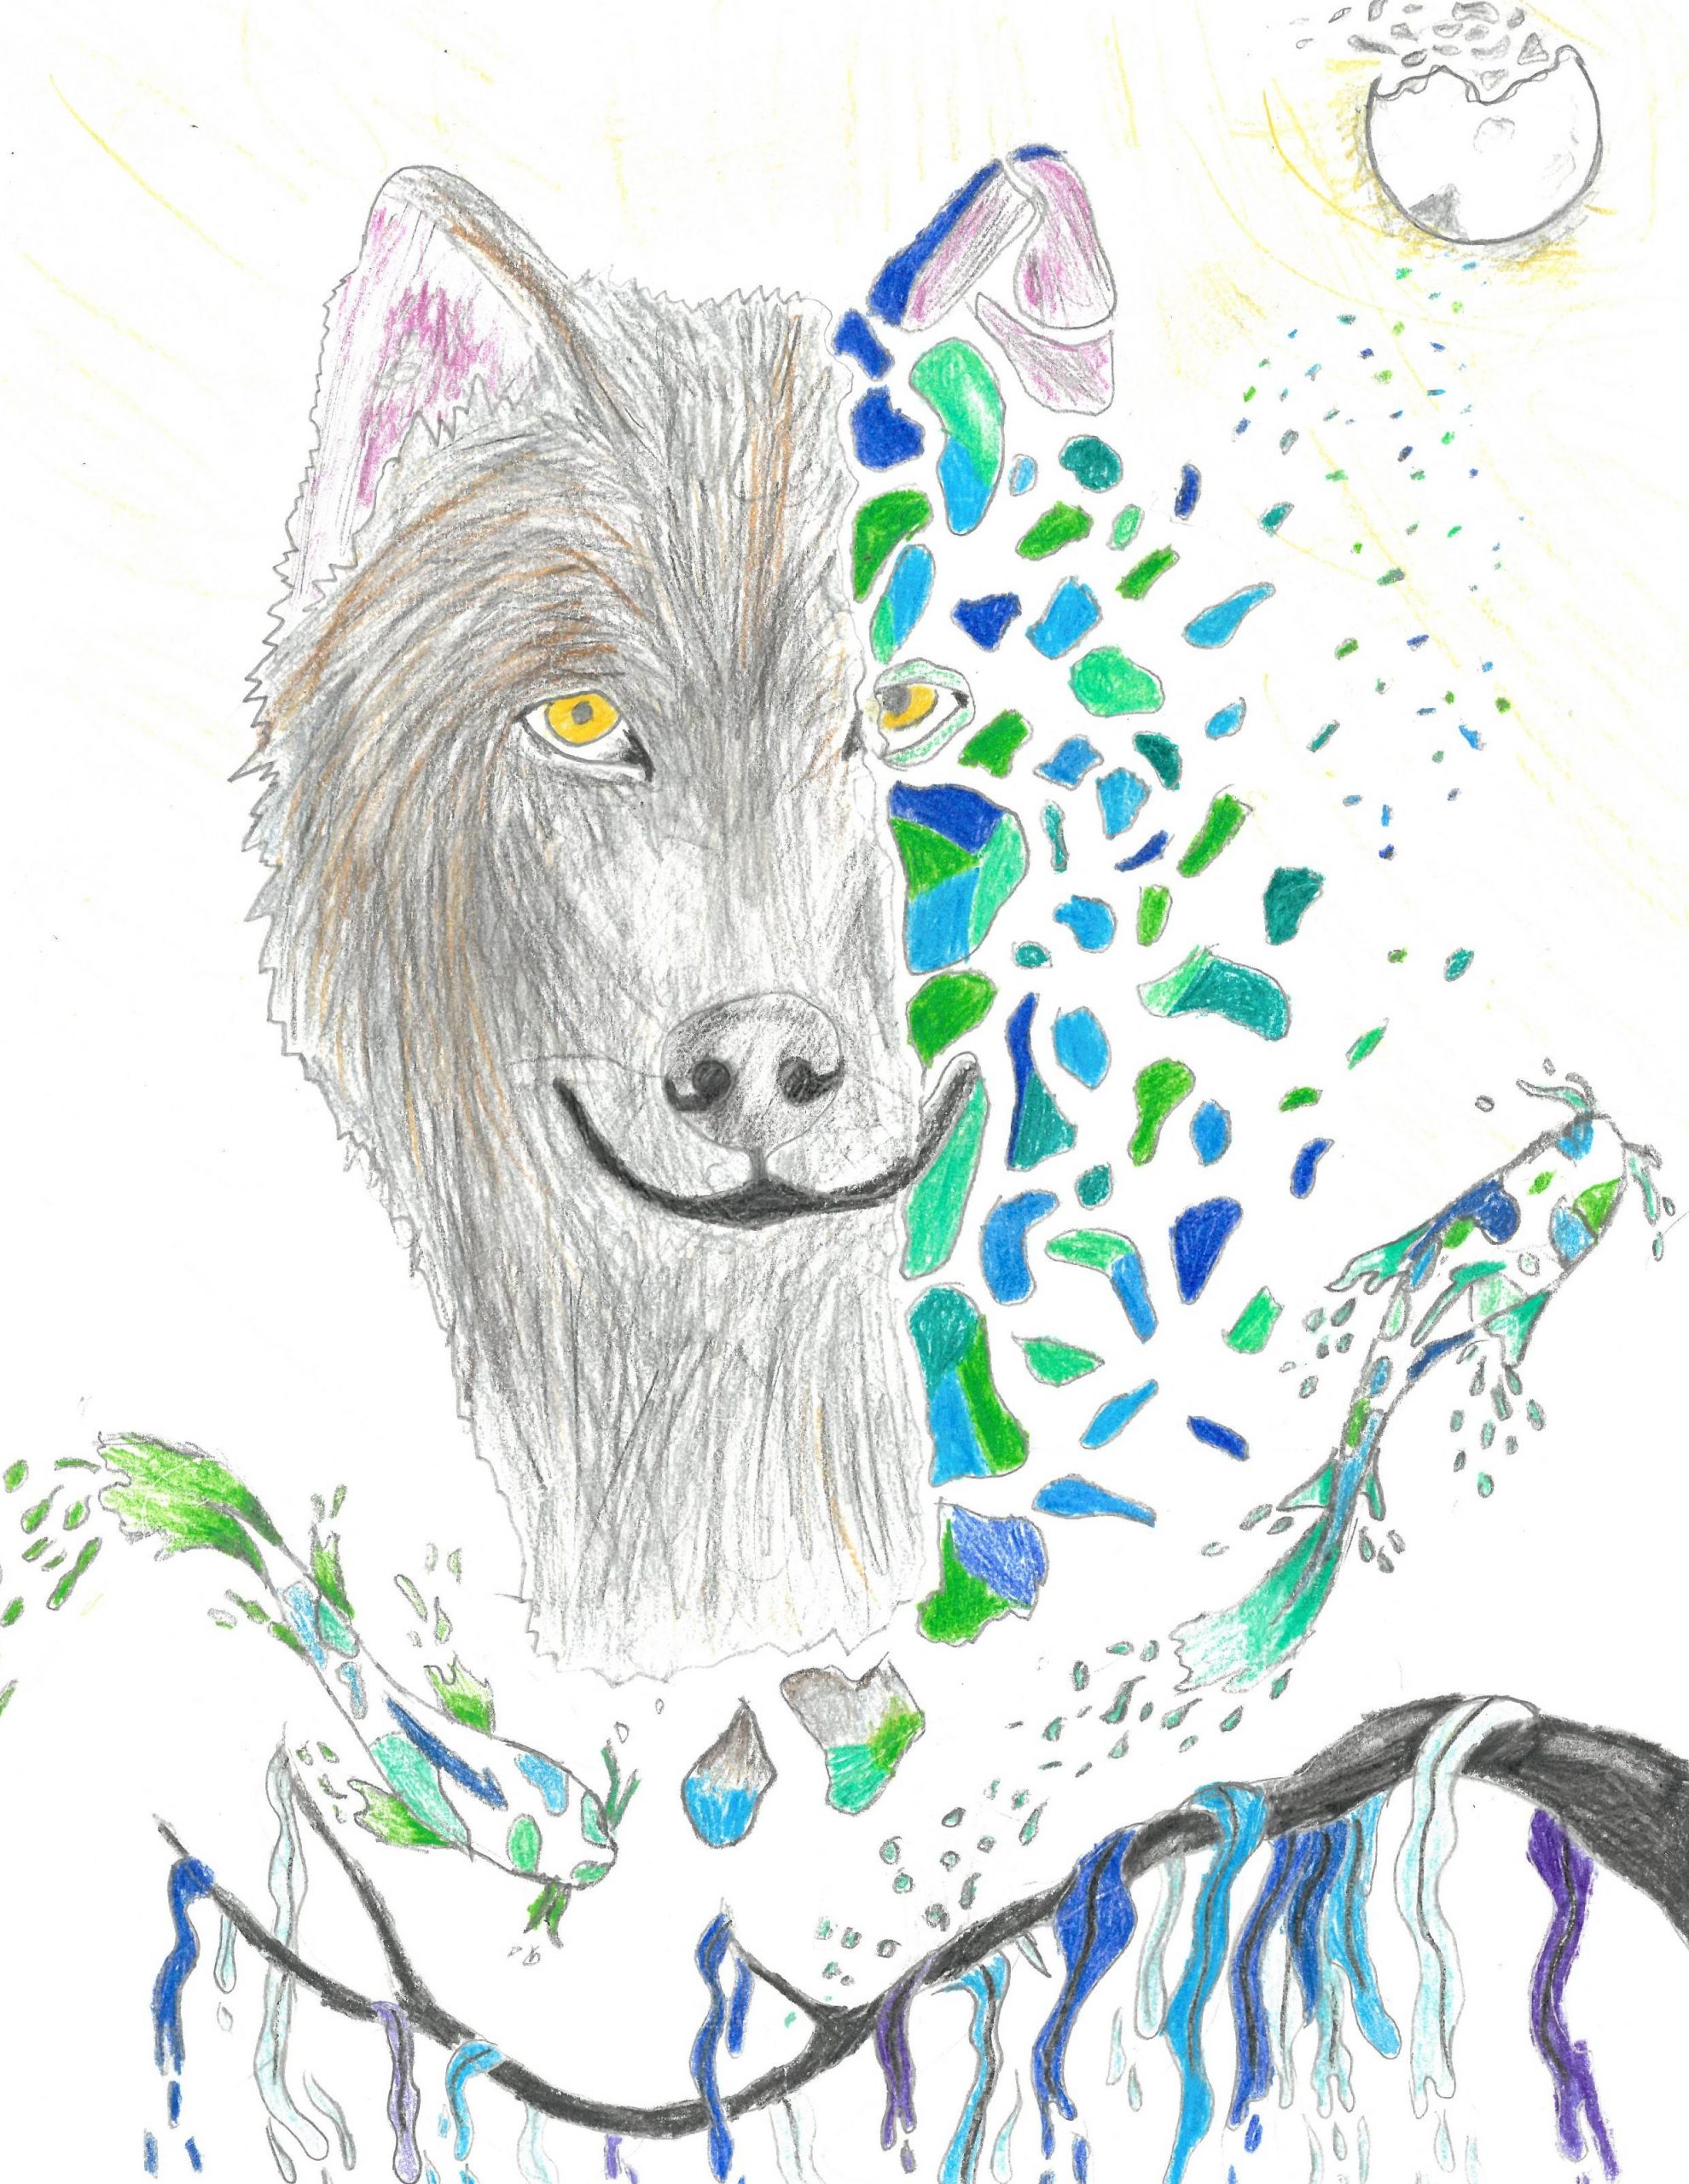 A sketch of a wolf, with half of its face being colorful ceramics